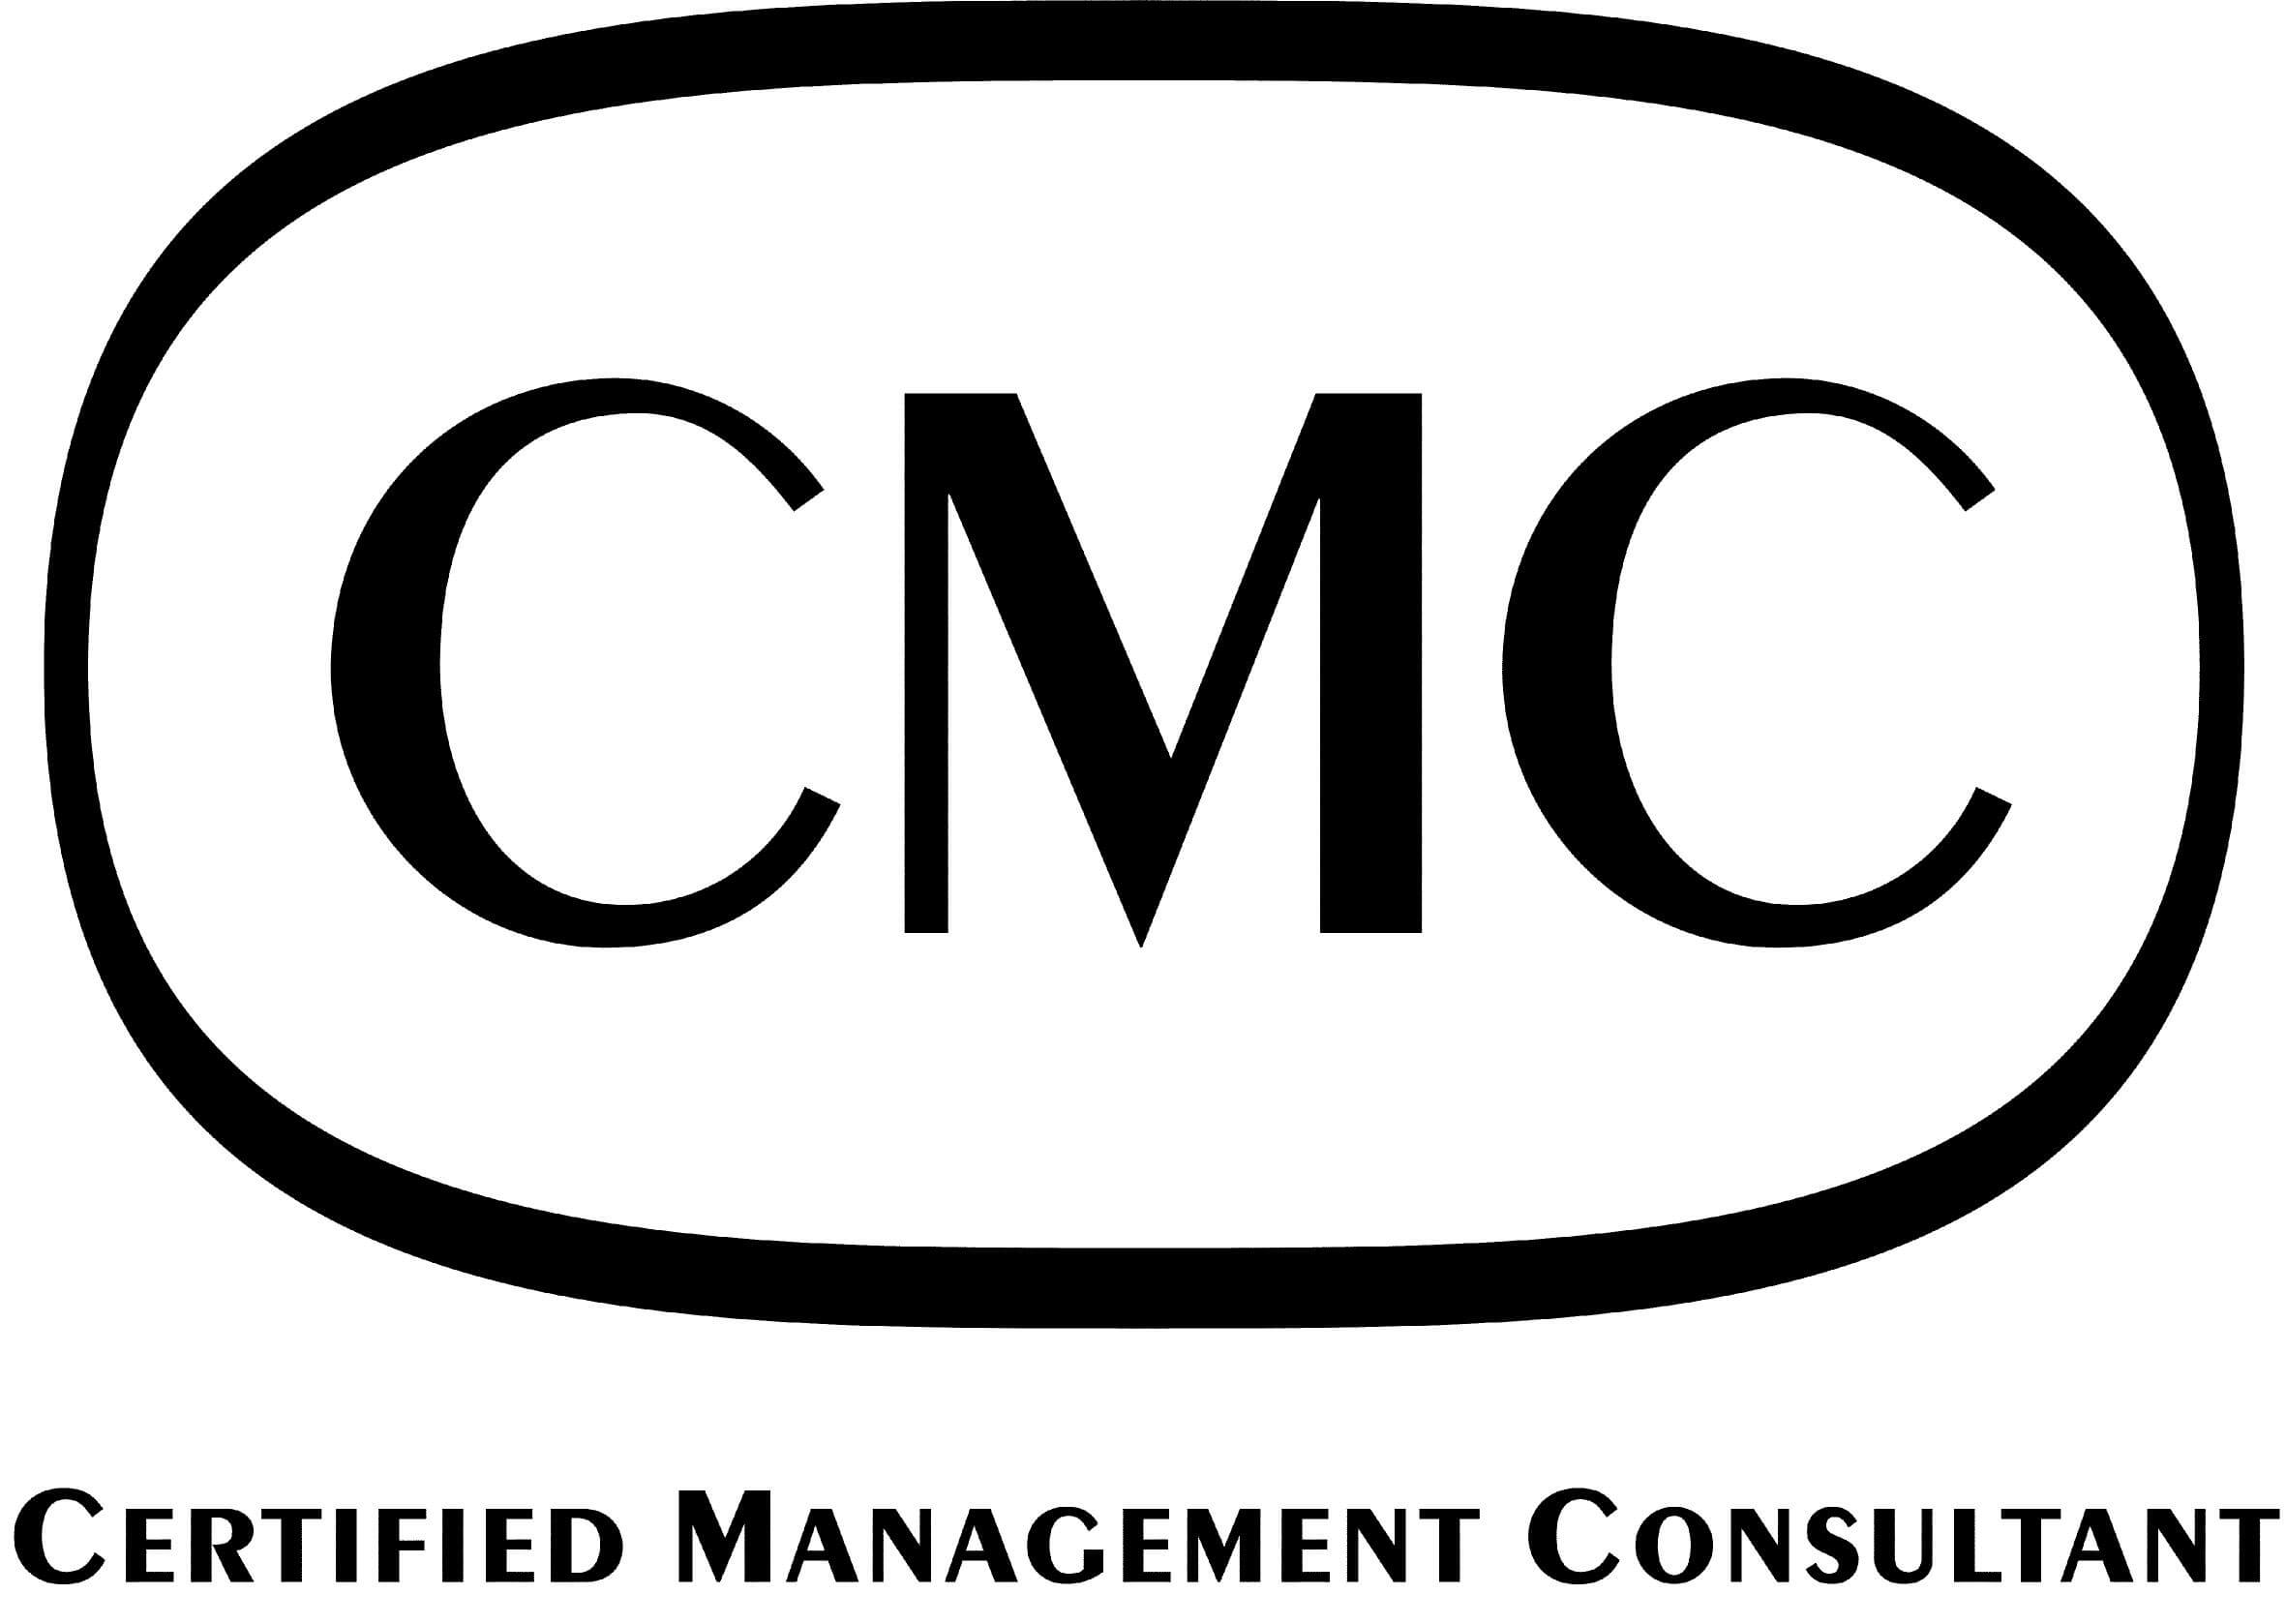 CMC Certified Management Consultant Certification Seal